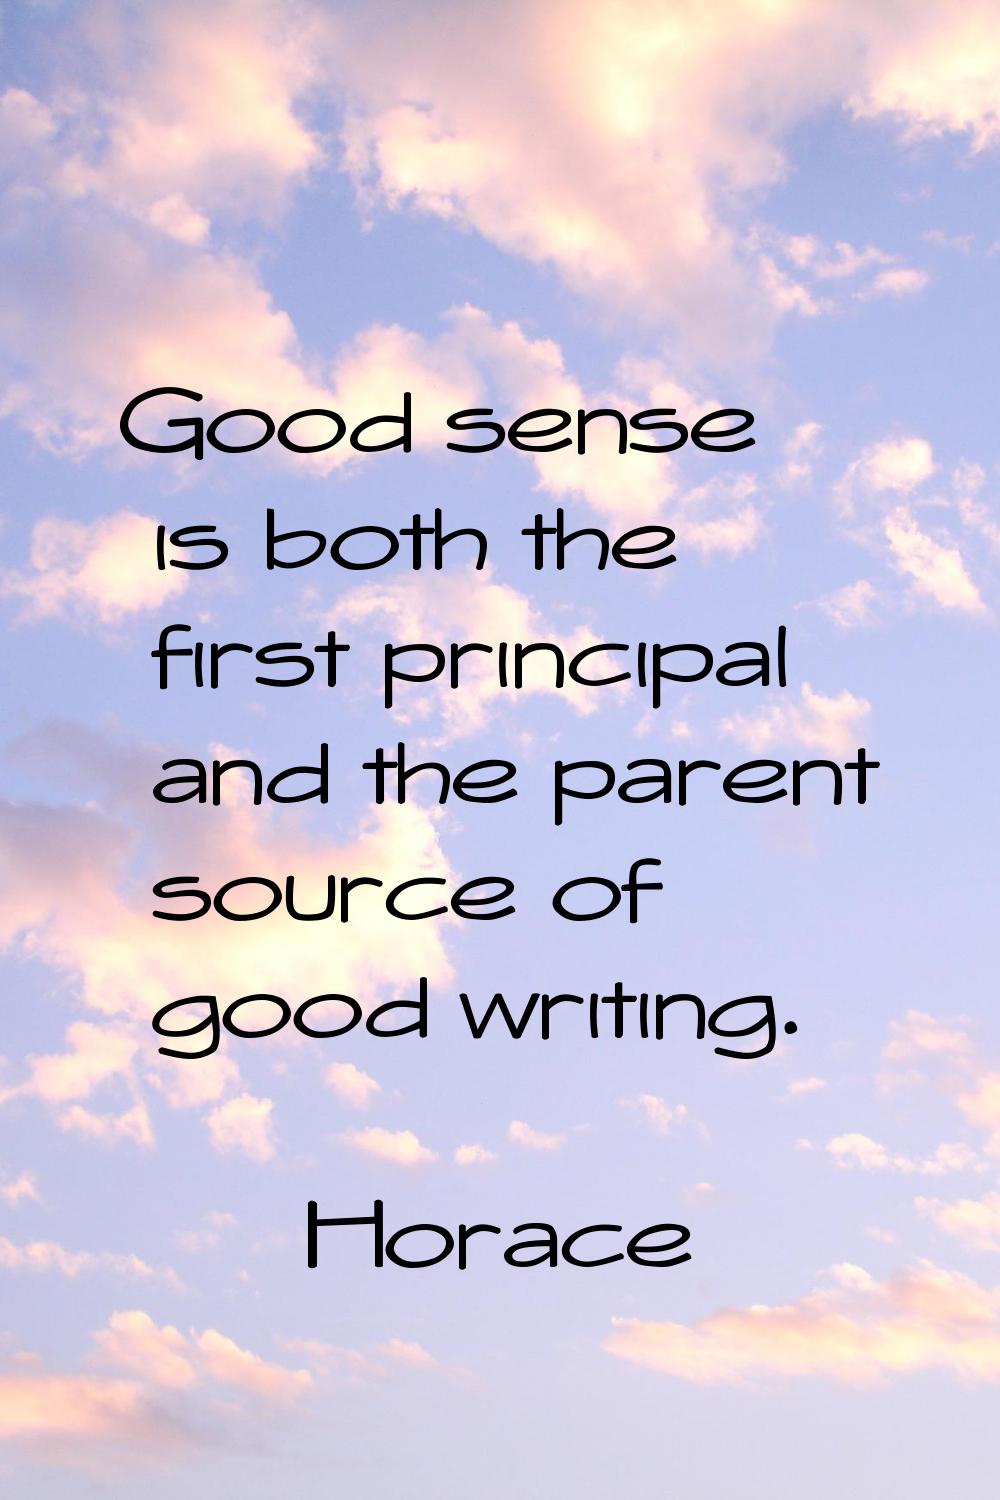 Good sense is both the first principal and the parent source of good writing.